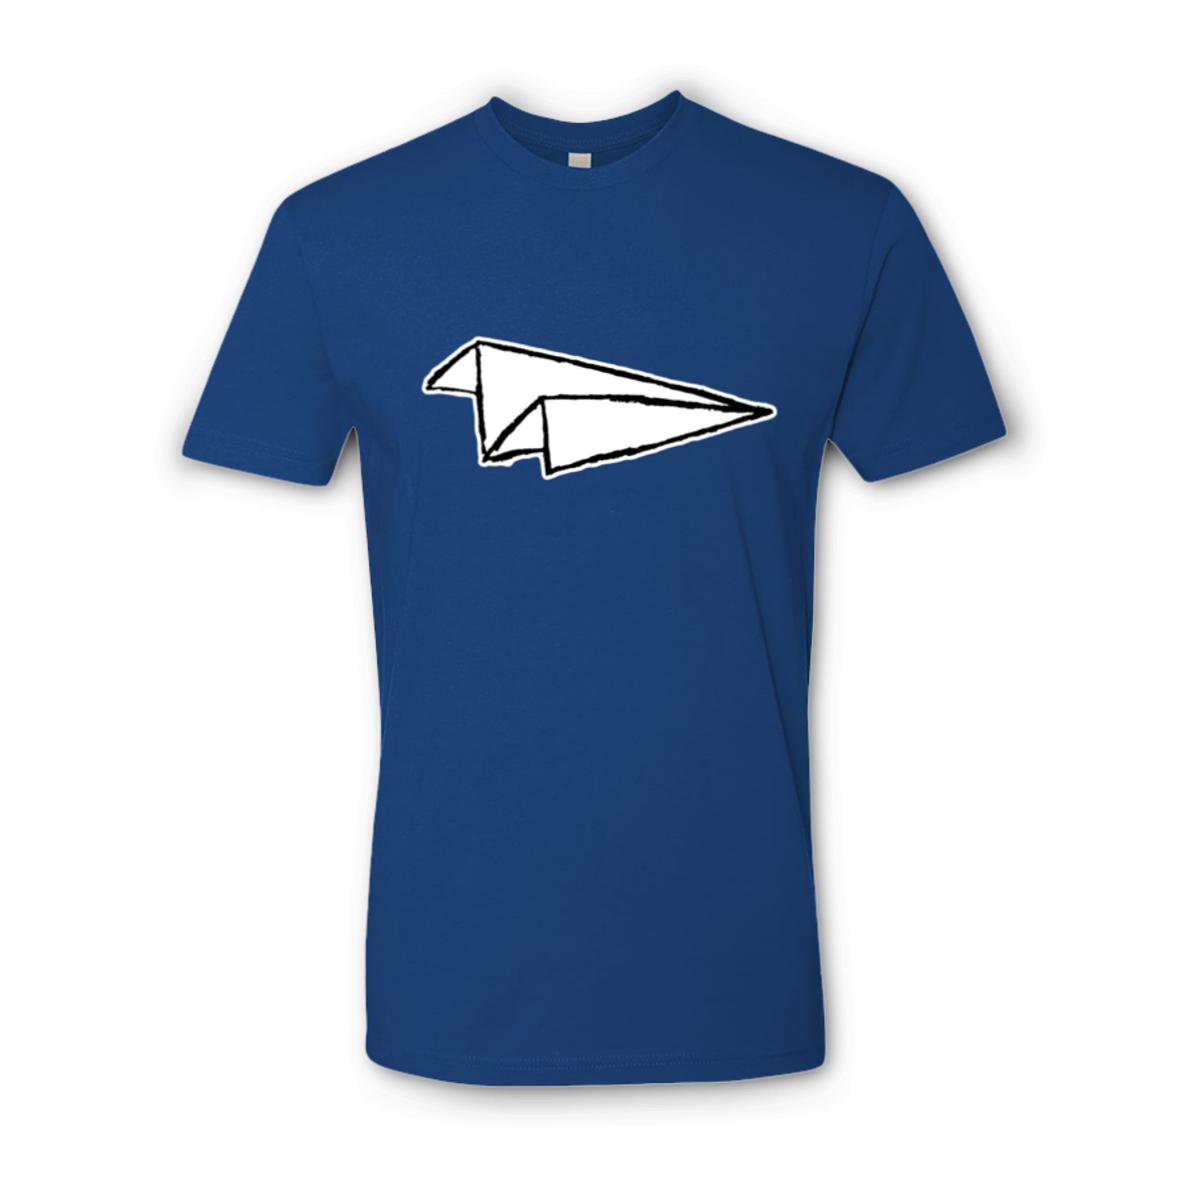 Airplane Sketch Unisex Tee Small royal-blue